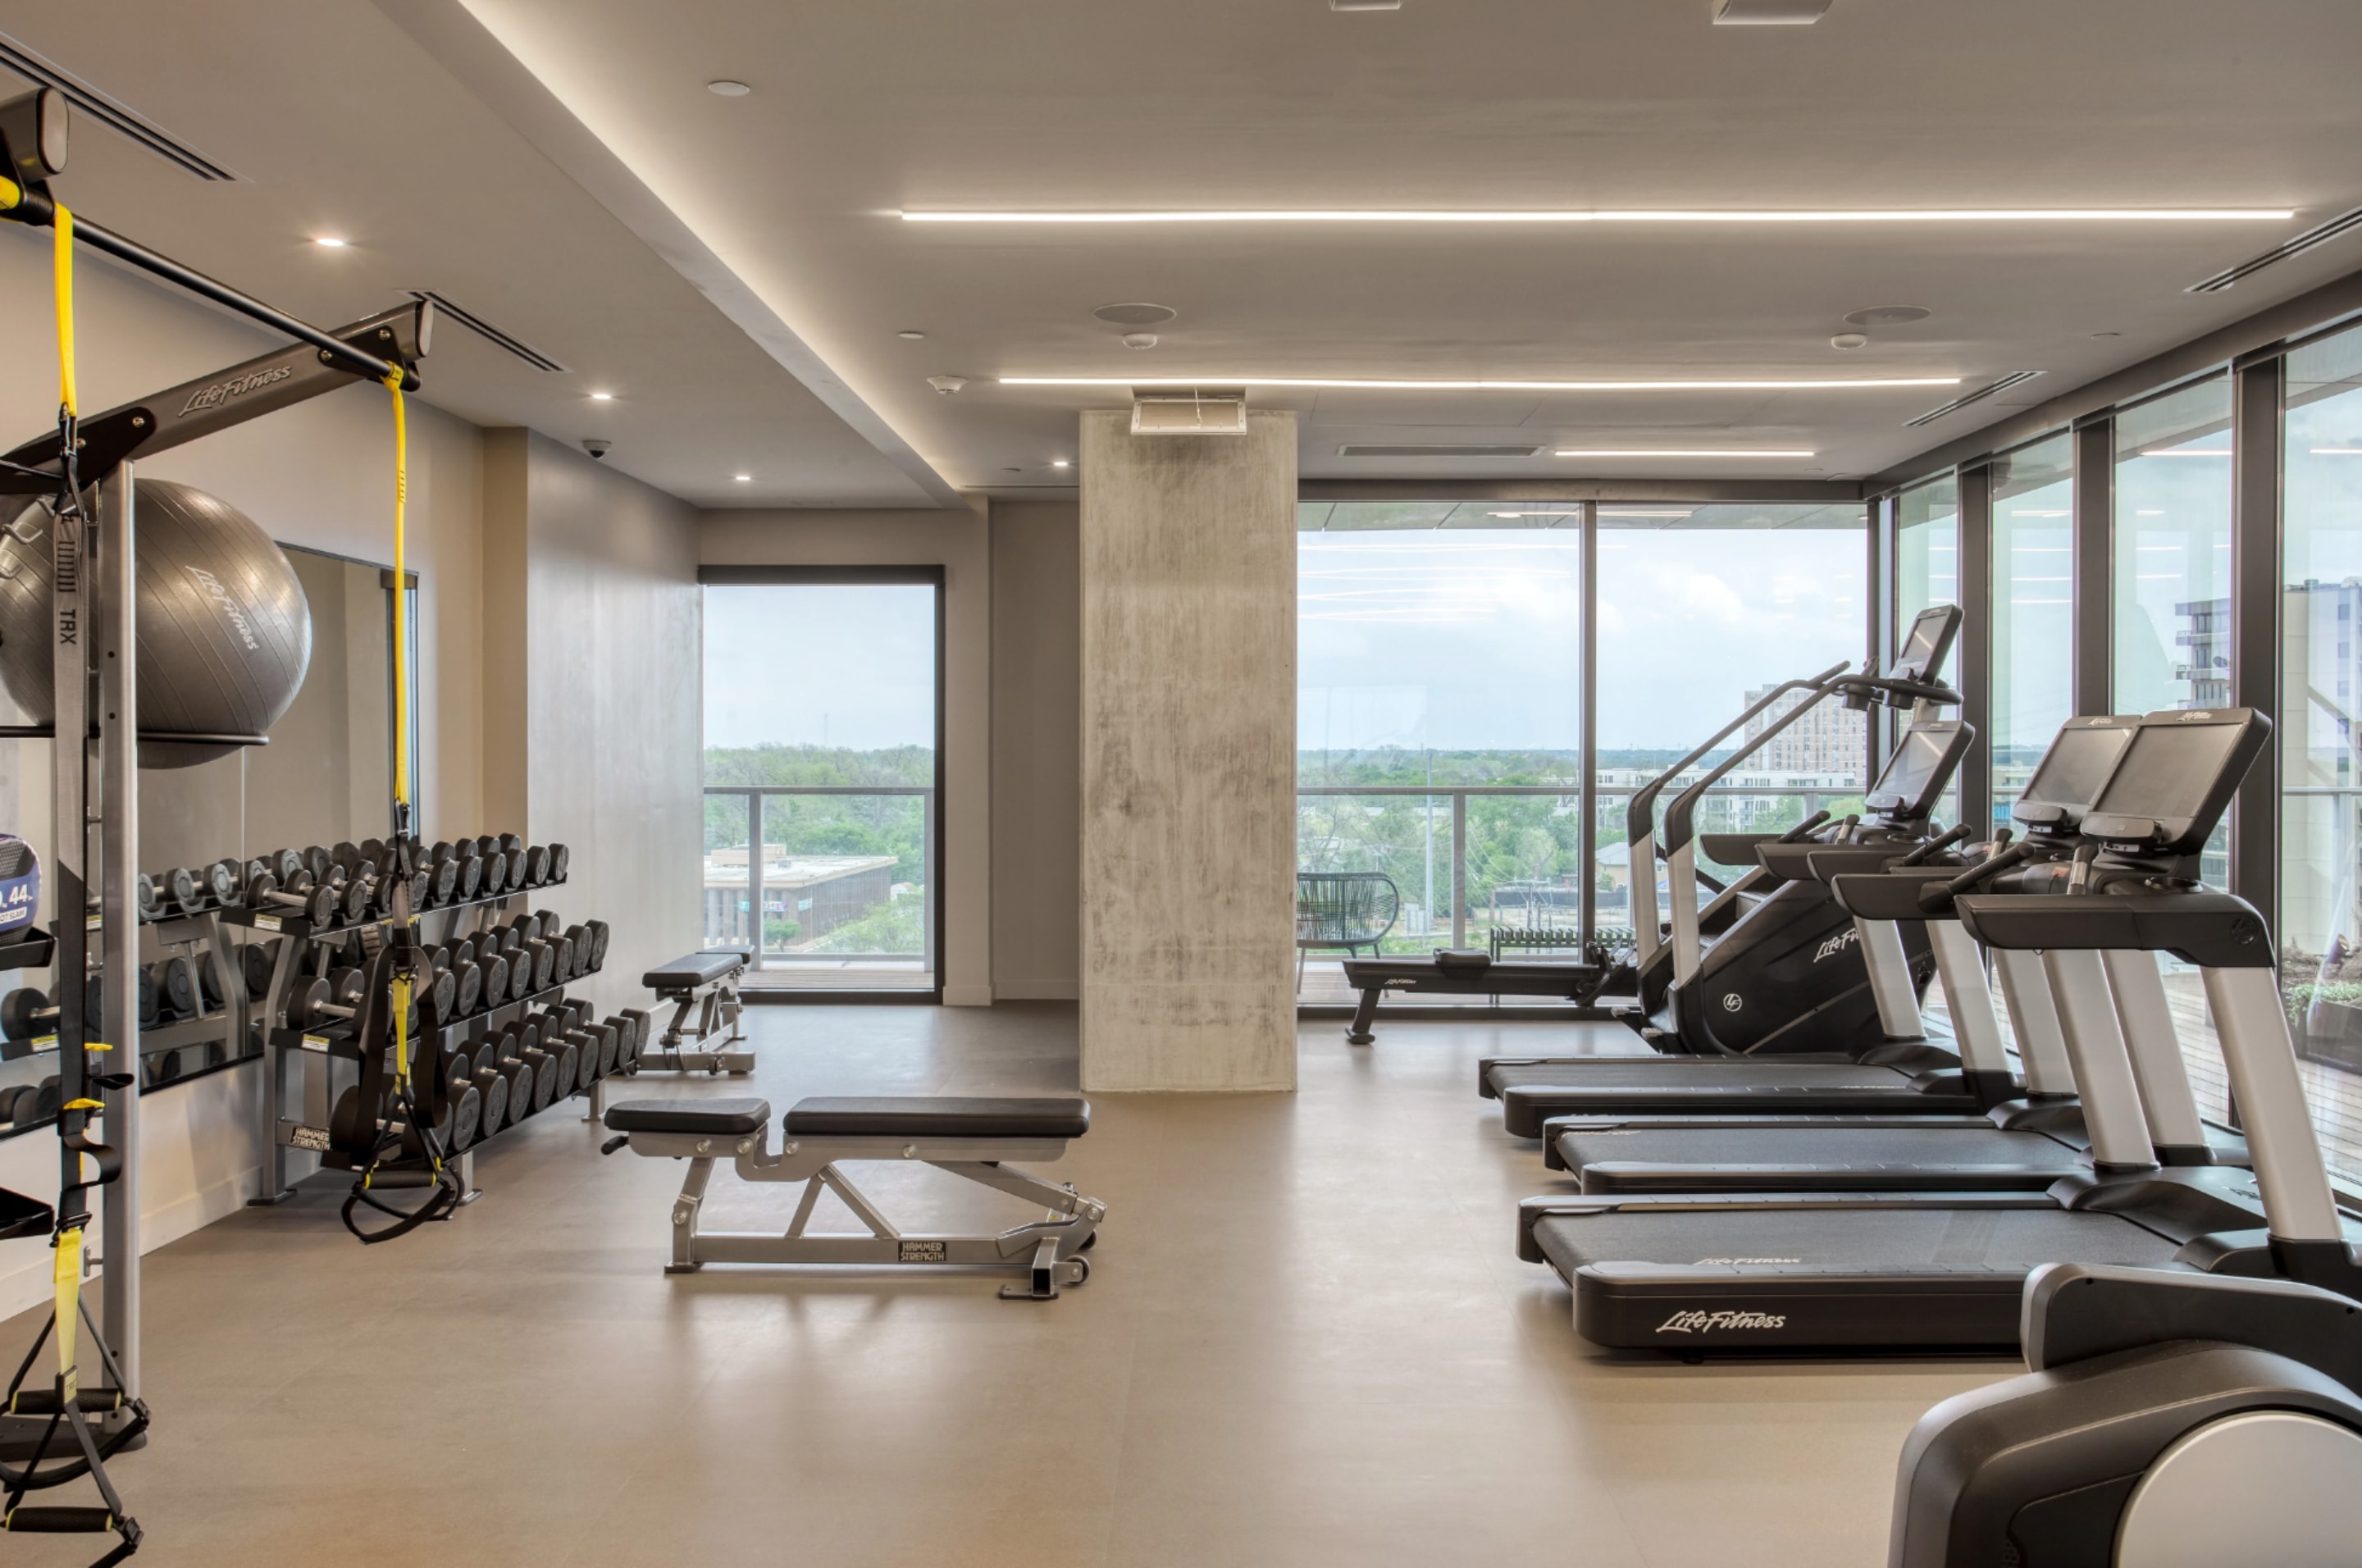 Gym boasts floor to ceiling windows and a corner view.